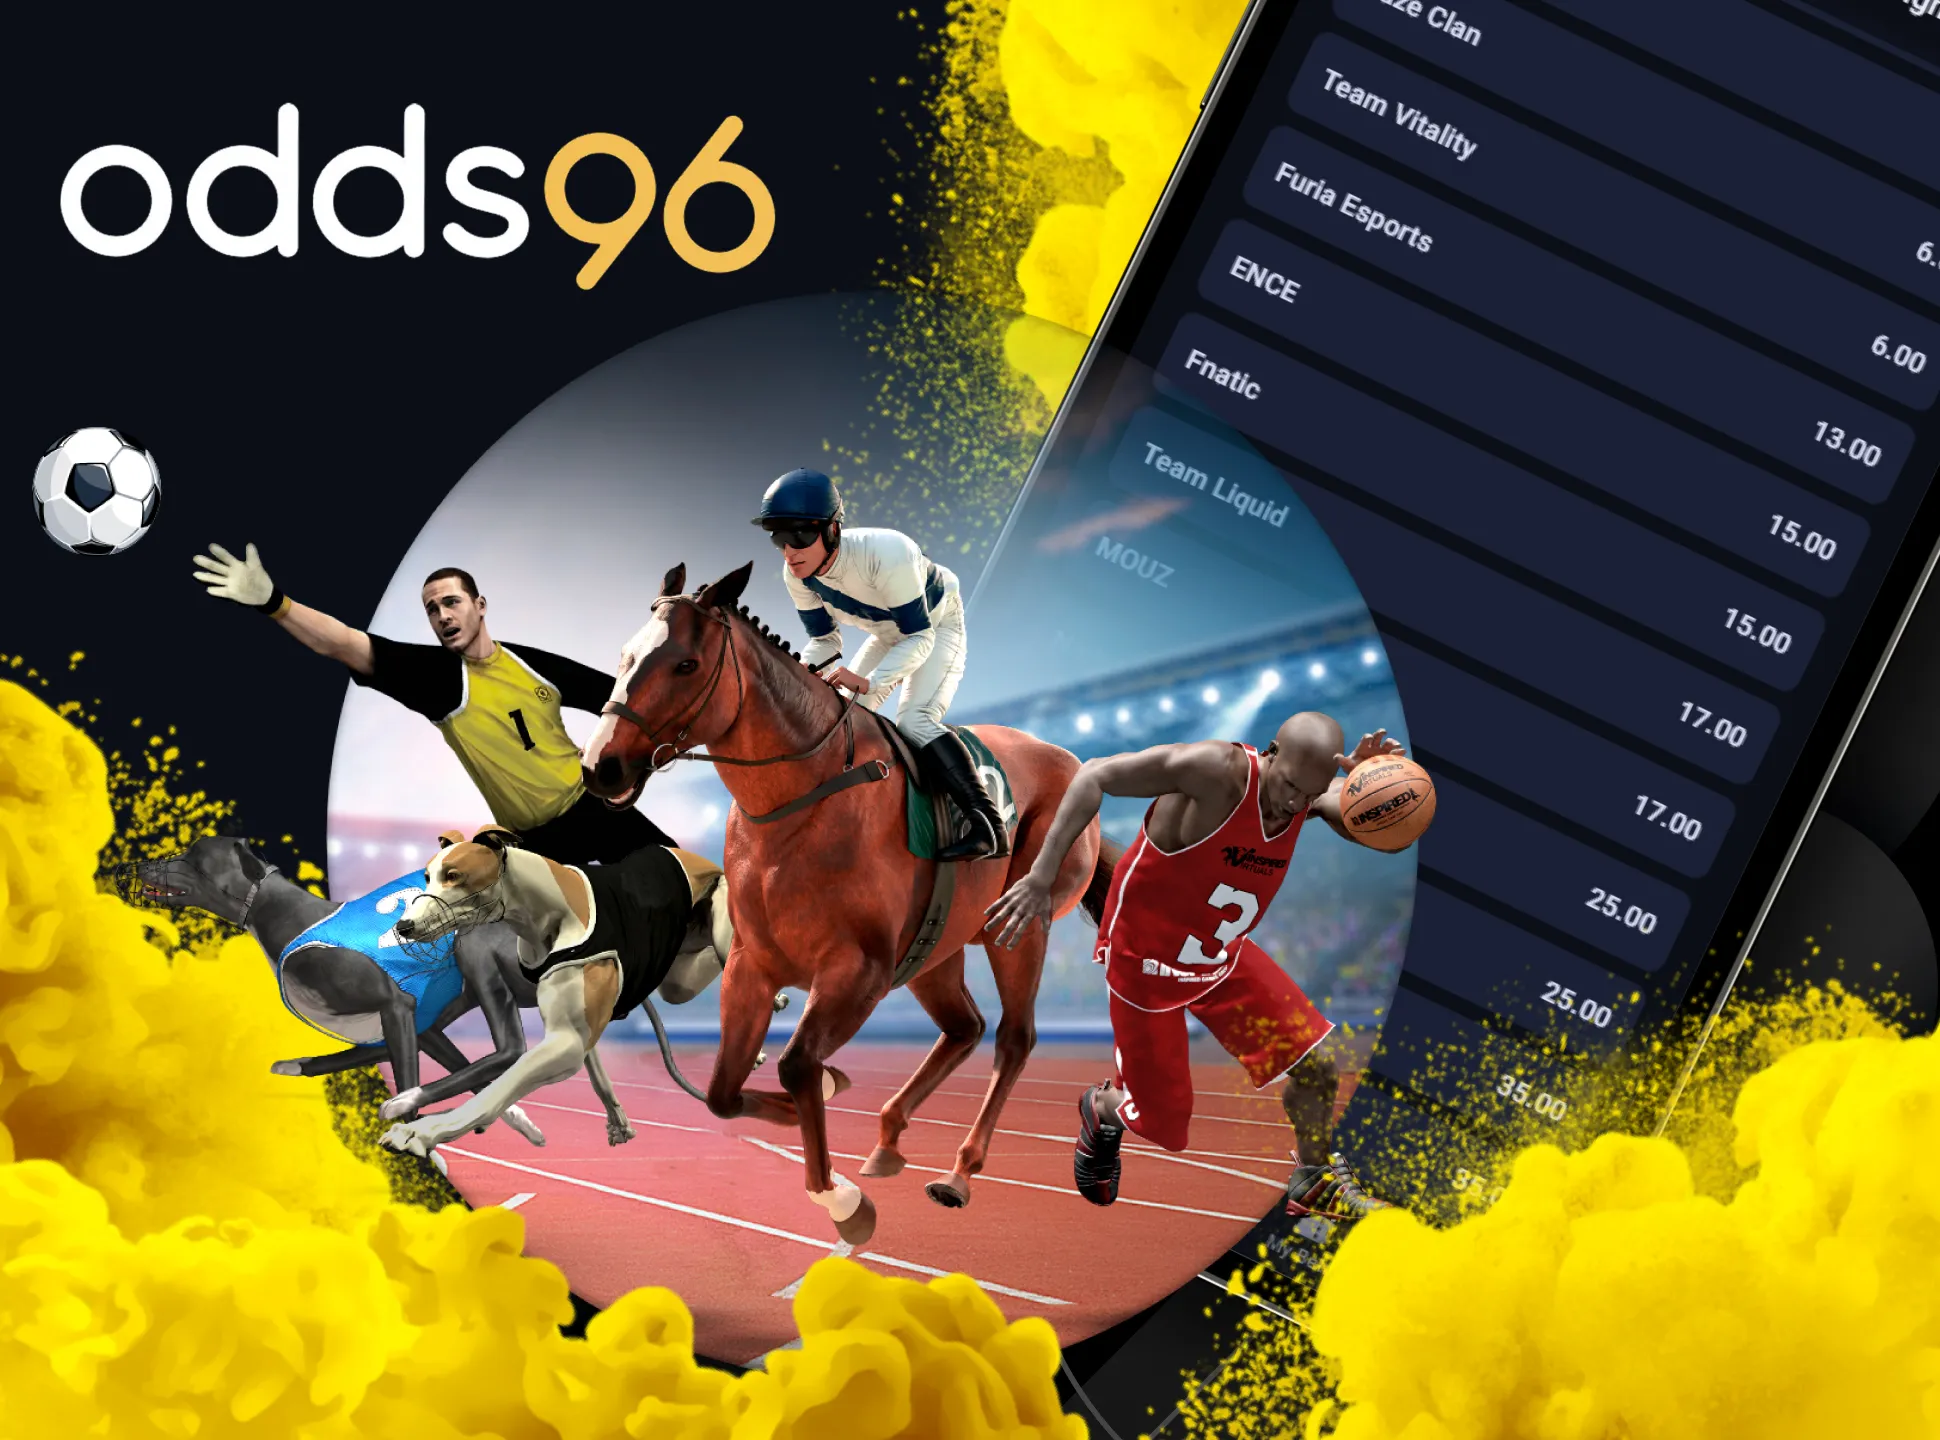 You can bet on virtual sports on special Odds96 page.